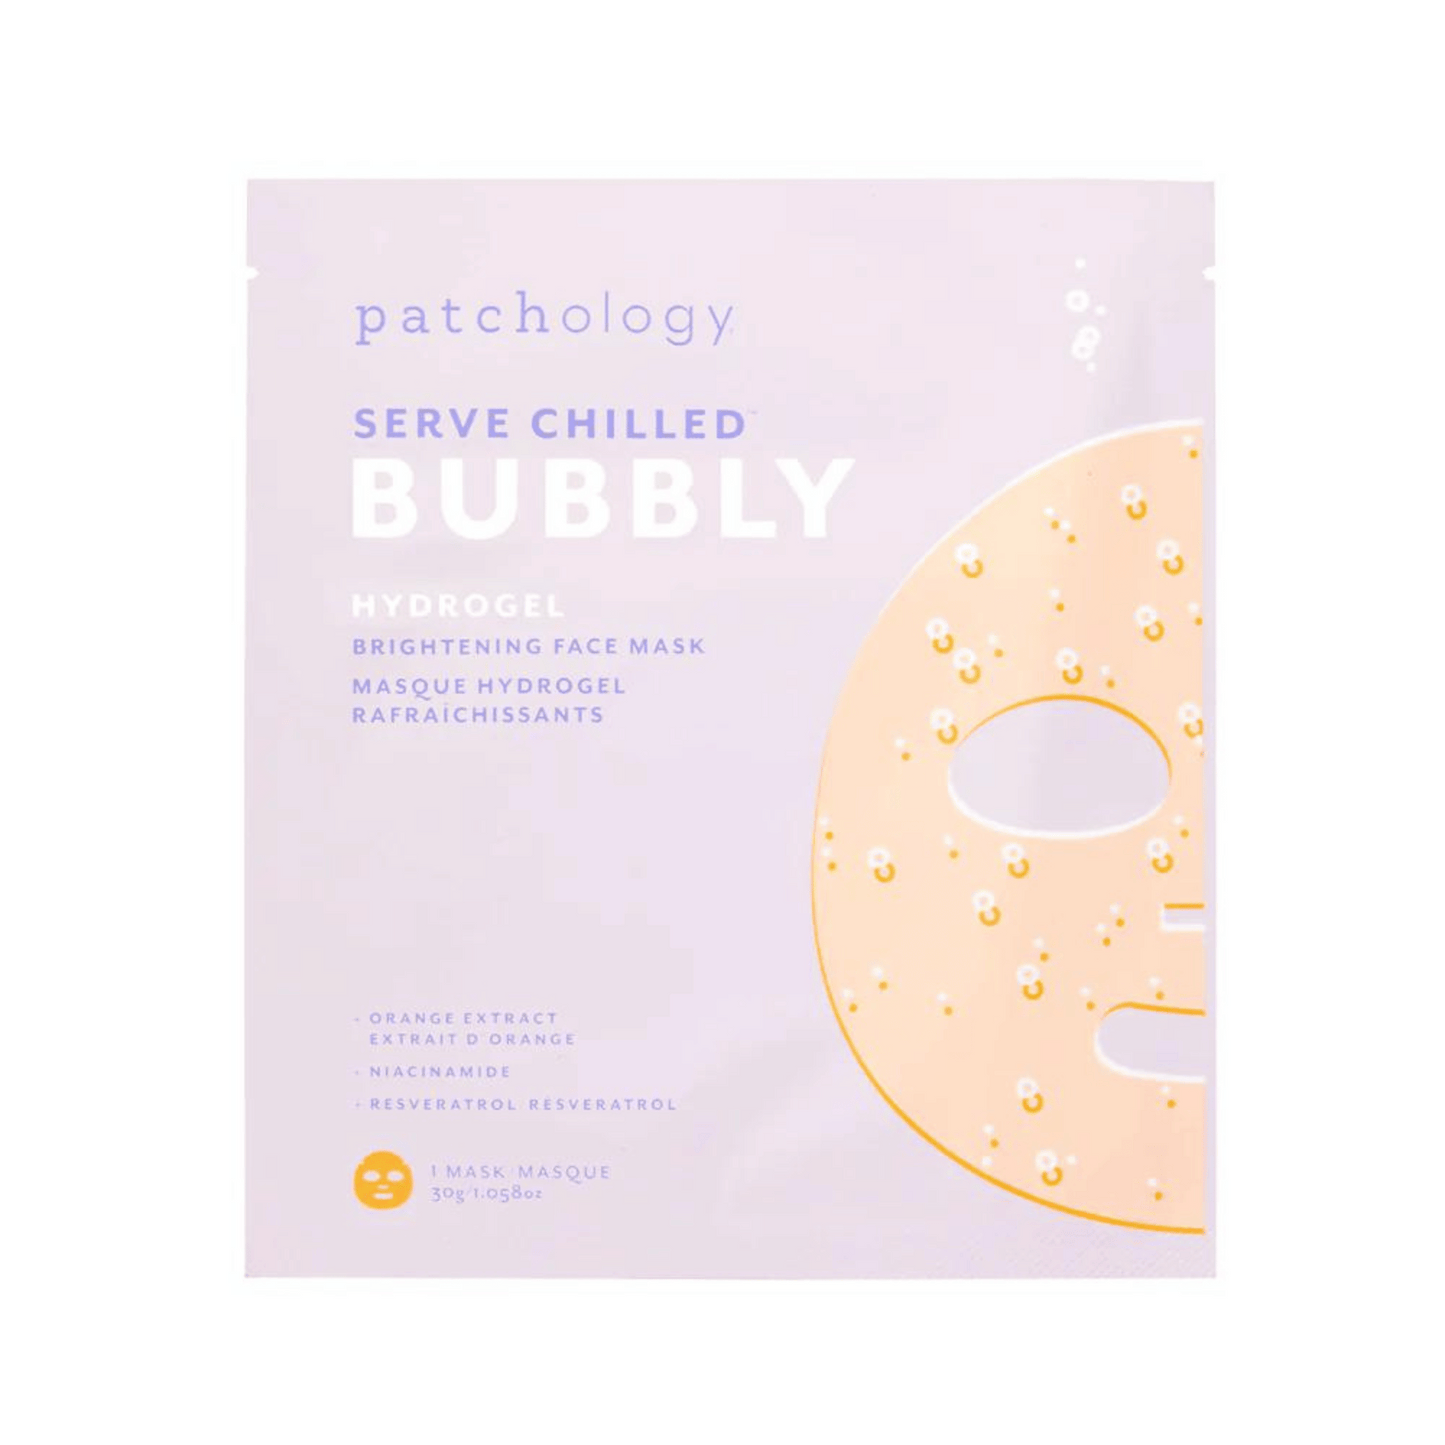 Primary Image of Served Chilled Bubbly Hydrogel Face Mask